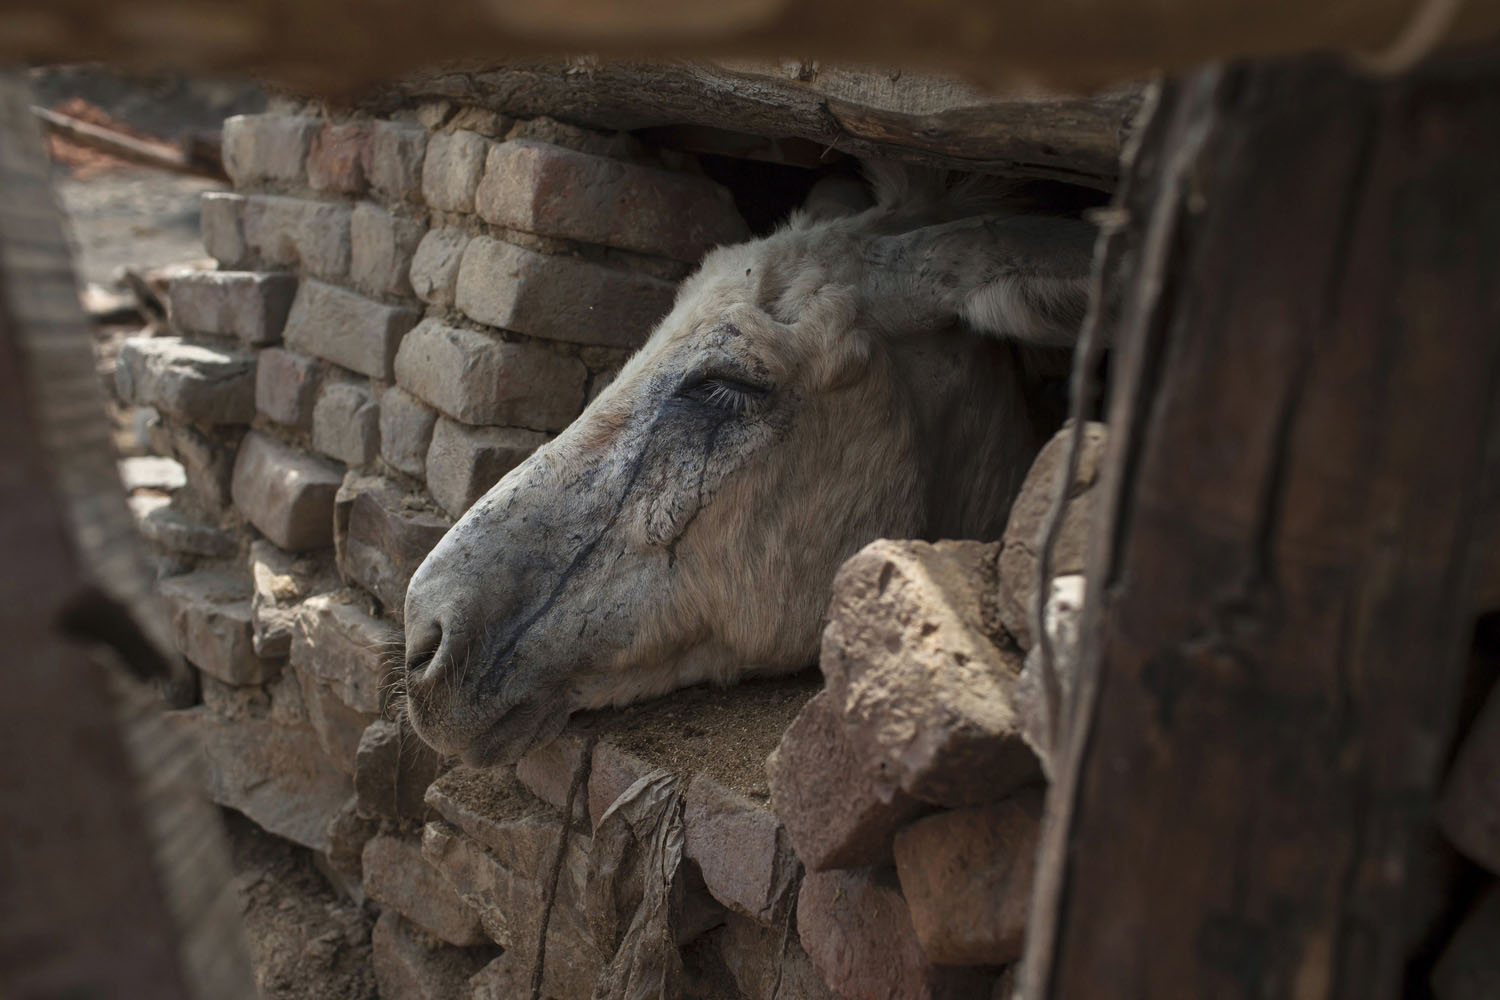 Tears of coal dust run down a donkey's face as it looks out of its shelter at a coal mine in Choa Saidan Shah in Punjab province